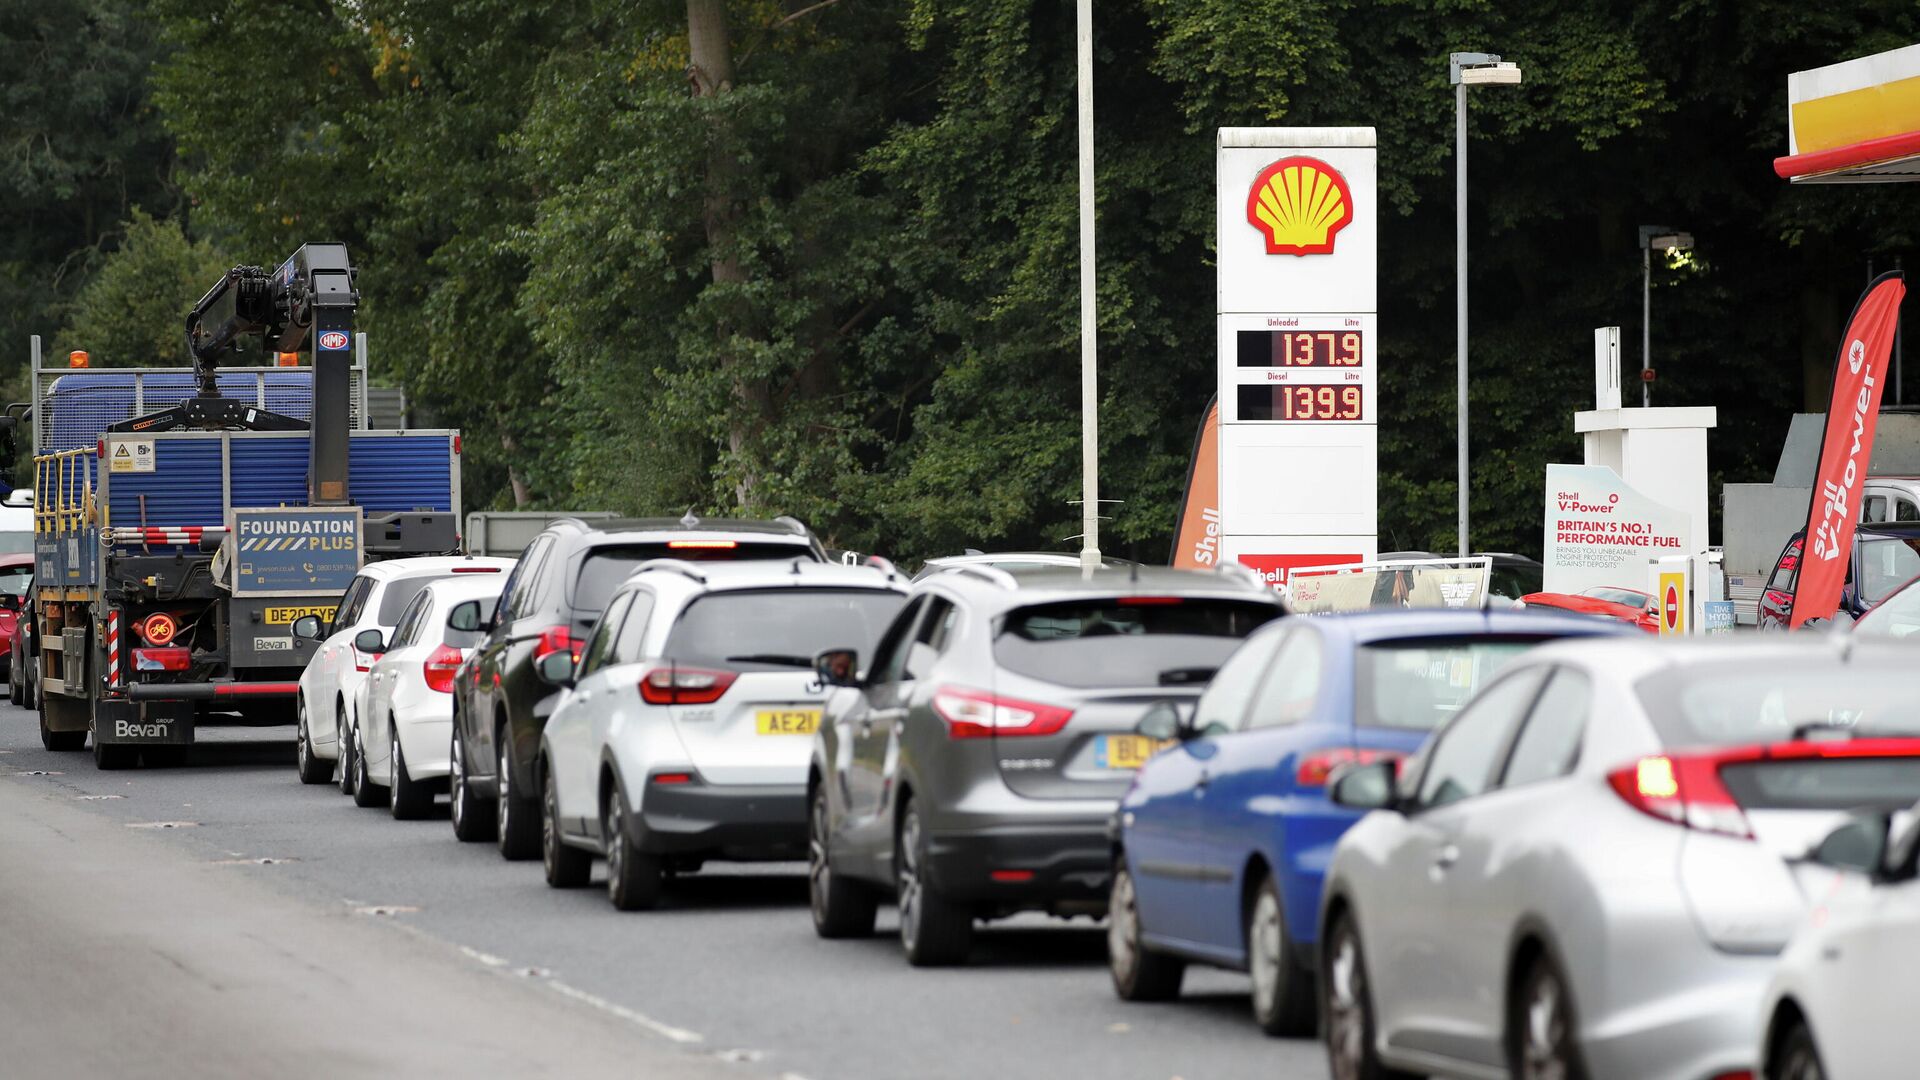 Vehicles queue to refill outside a Shell fuel station in Redbourn, Britain, September 25, 2021. REUTERS/Peter Cziborra - Sputnik International, 1920, 25.09.2021